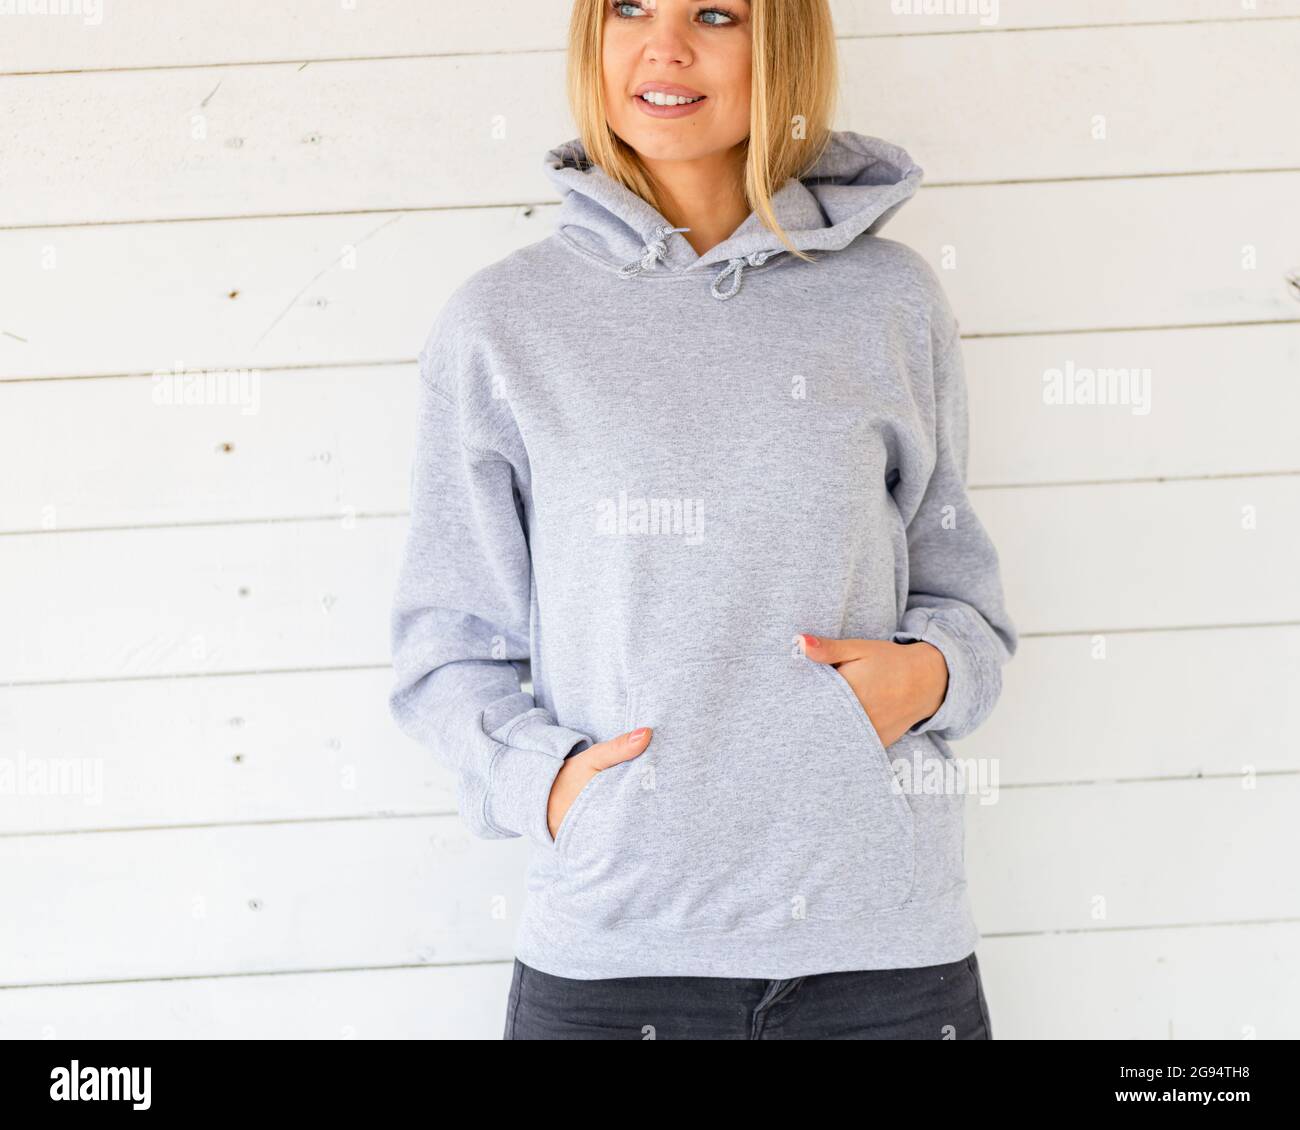 Smiling blond woman wears light grey hoodie. She stands in front of camera, behind her is white board. There is empty area on her hoodie for inscription, clothing design for fashion mockup. Stock Photo